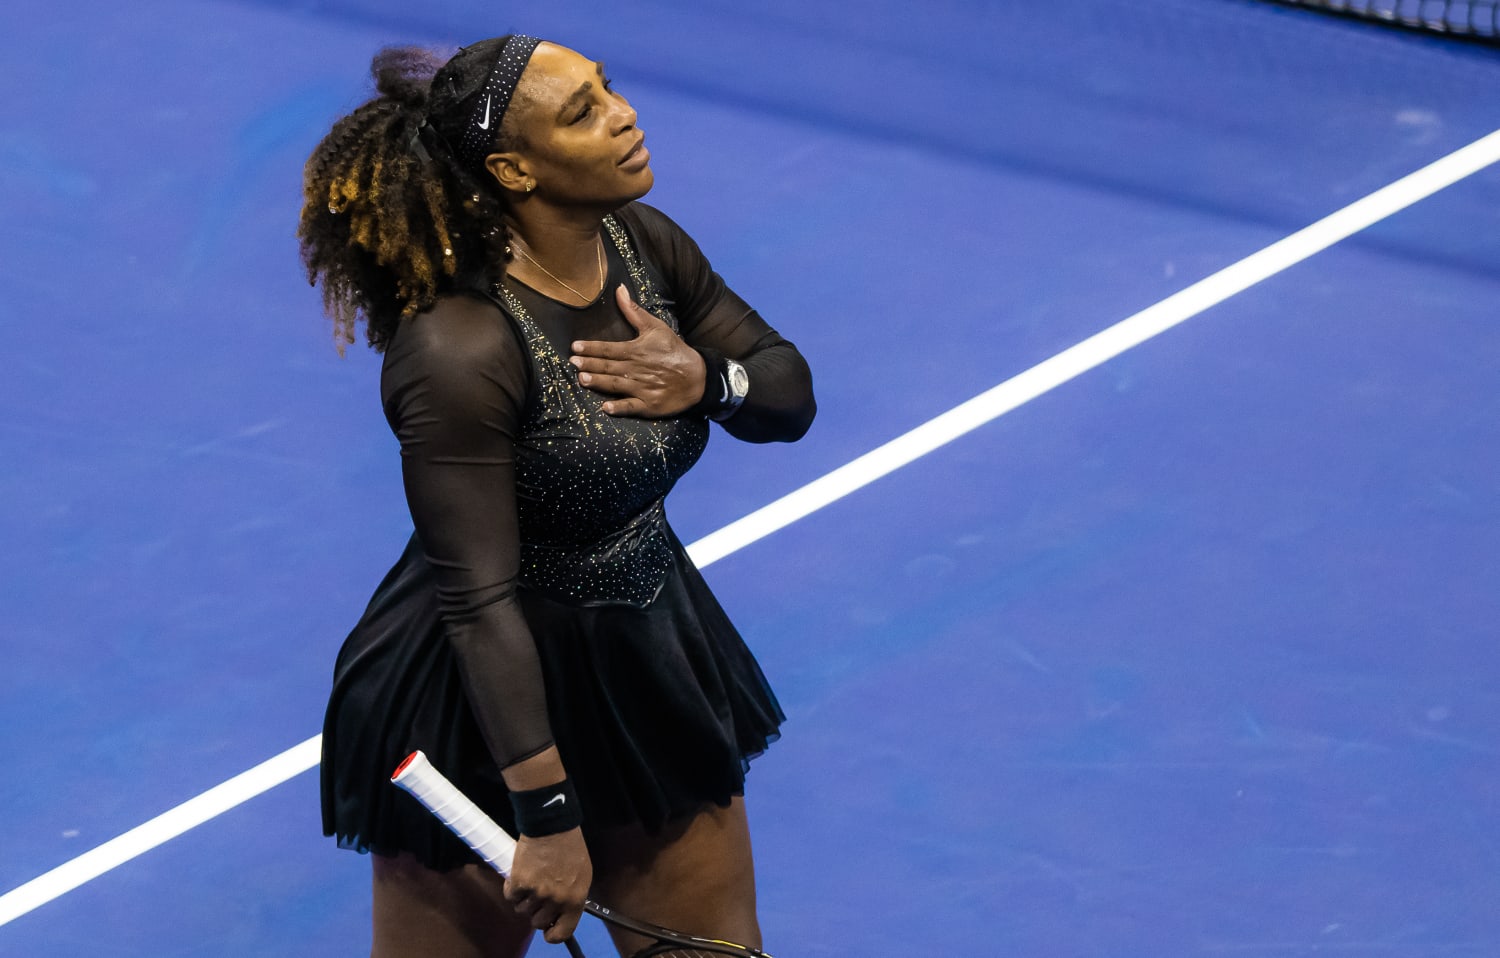 Serena Williams' dad 'King Richard' reveals he called and begged her to do  more tournaments after her last match